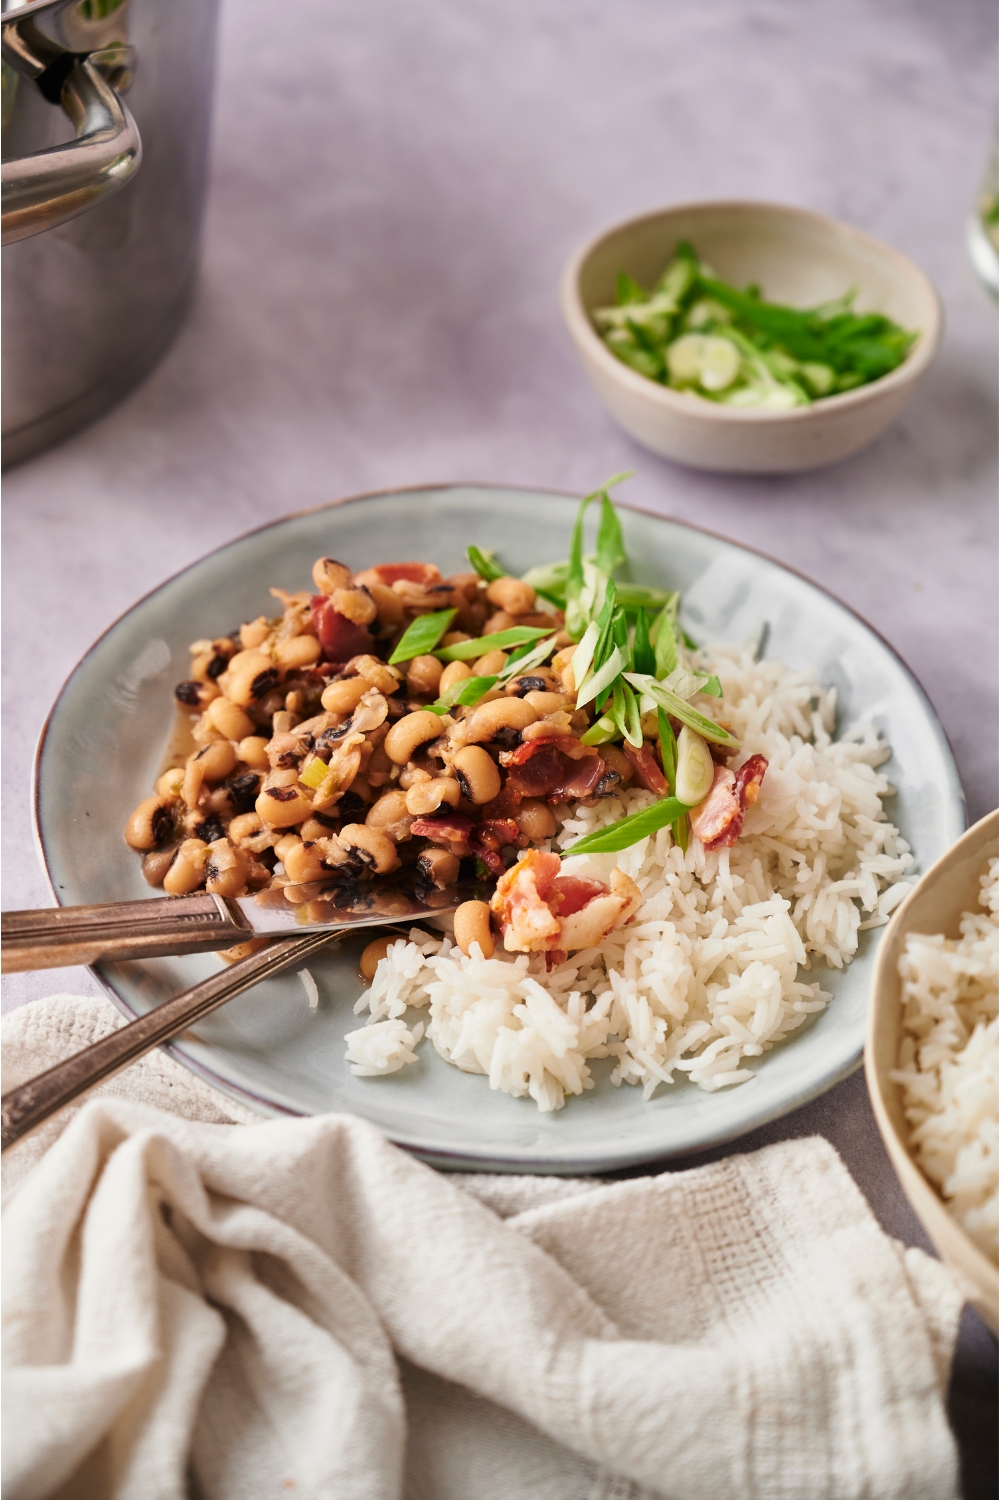 Blue bowl with hoppin' john, white rice, and a fork and knife.